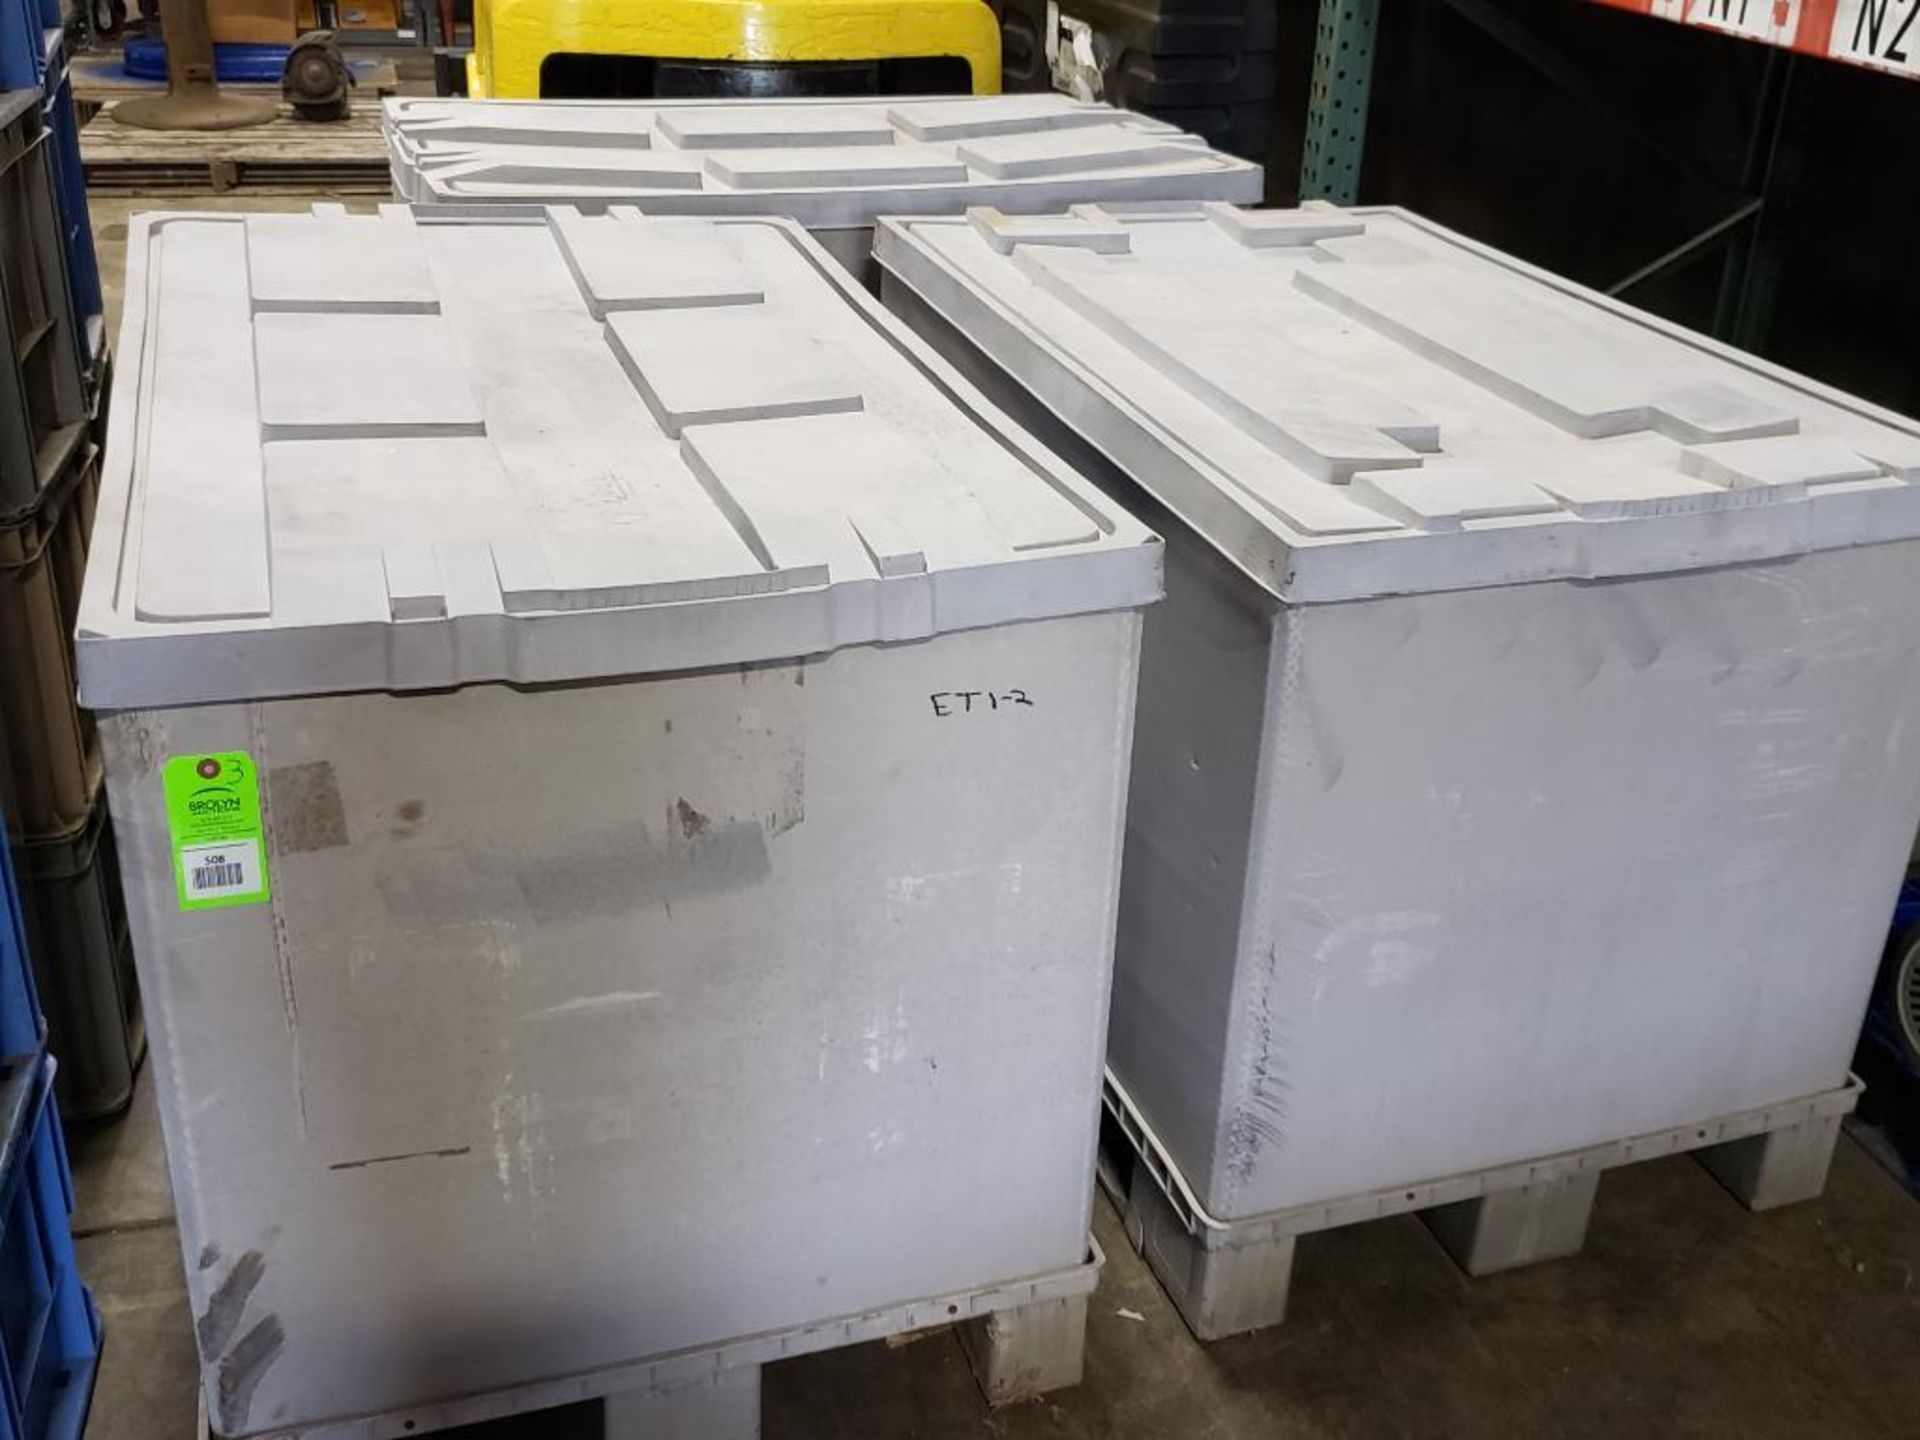 Qty 3 - Large plastic totes / gaylords, pallet size totes with lids.